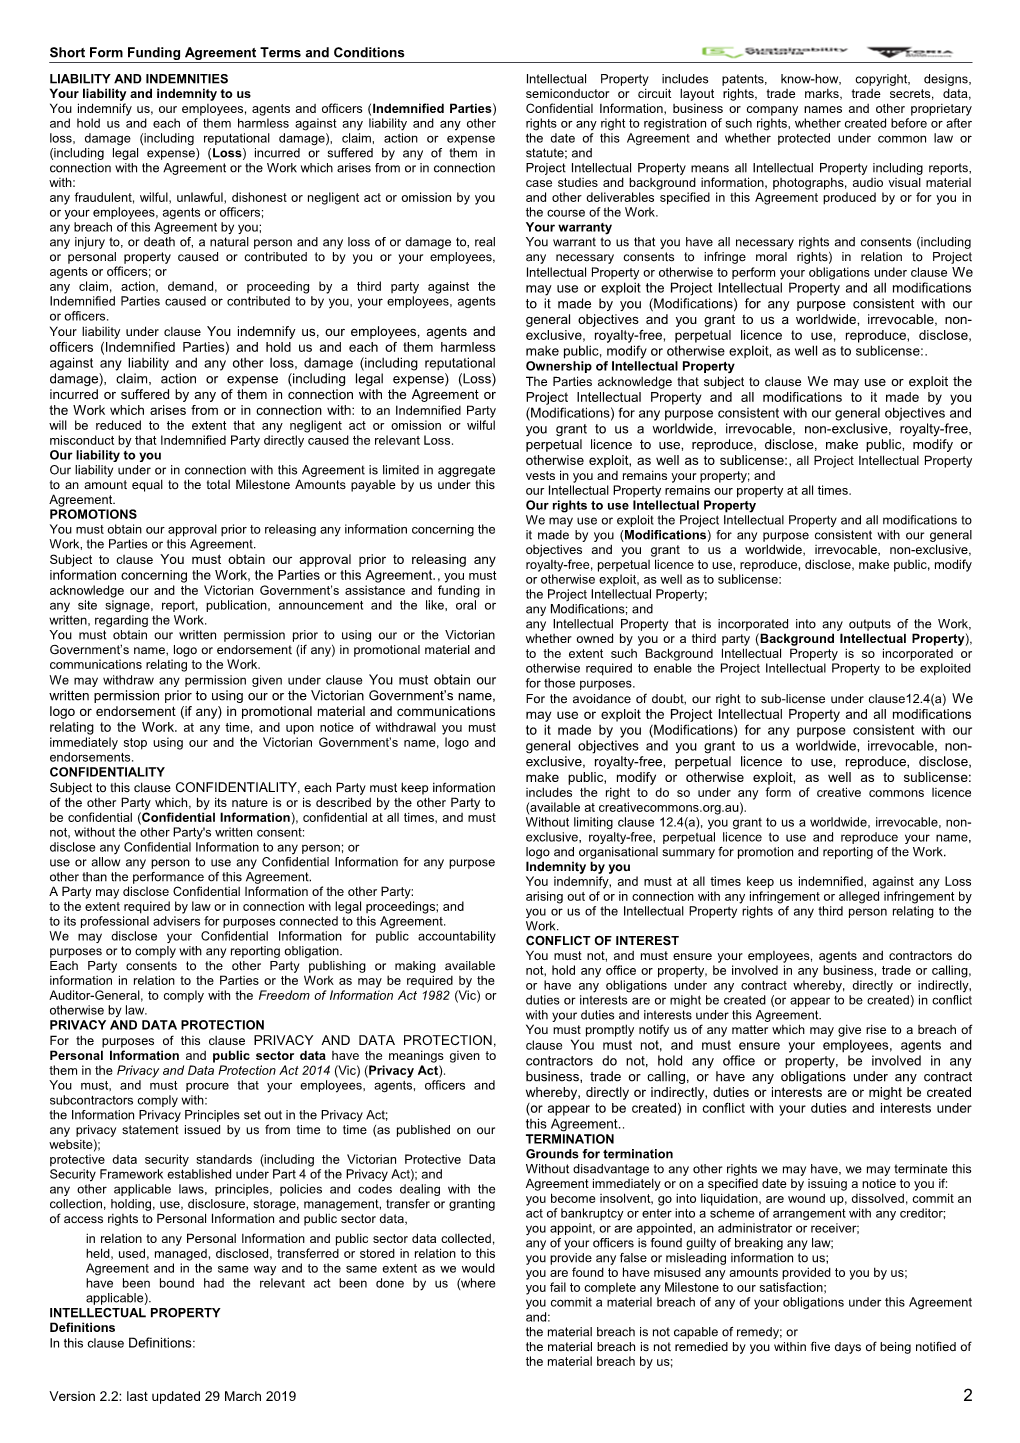 Sustainability Victoria Short Form Funding Agreement Terms and Conditions